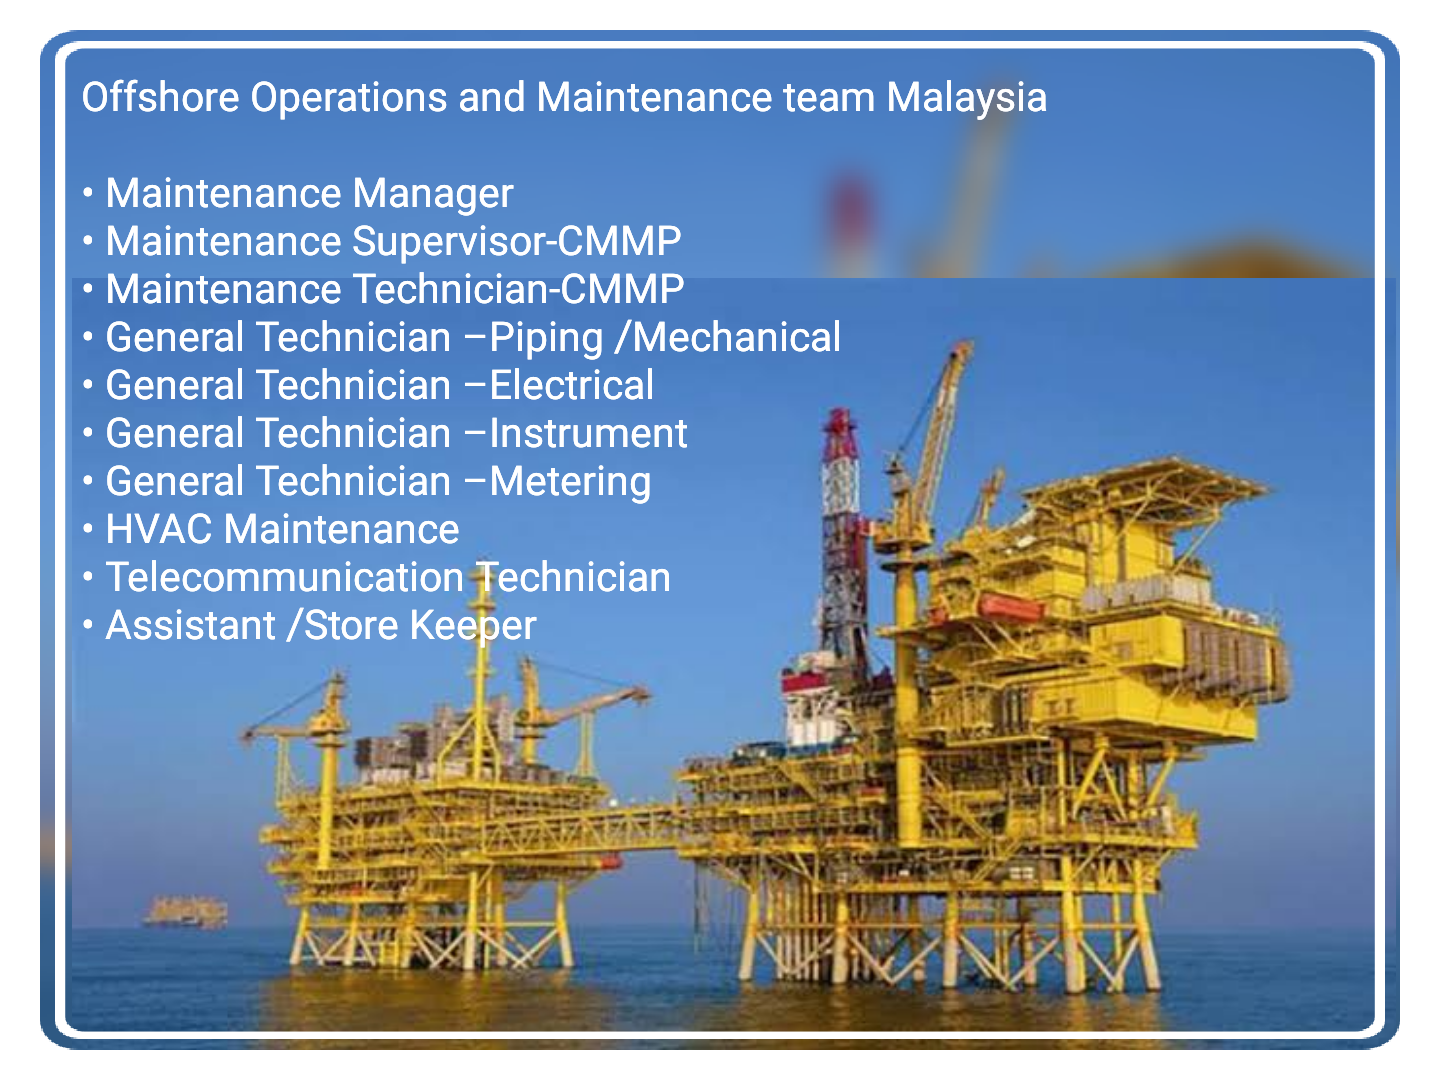 General Technician Piping, Mechanical, Electrical, Instrument & Metering Jobs